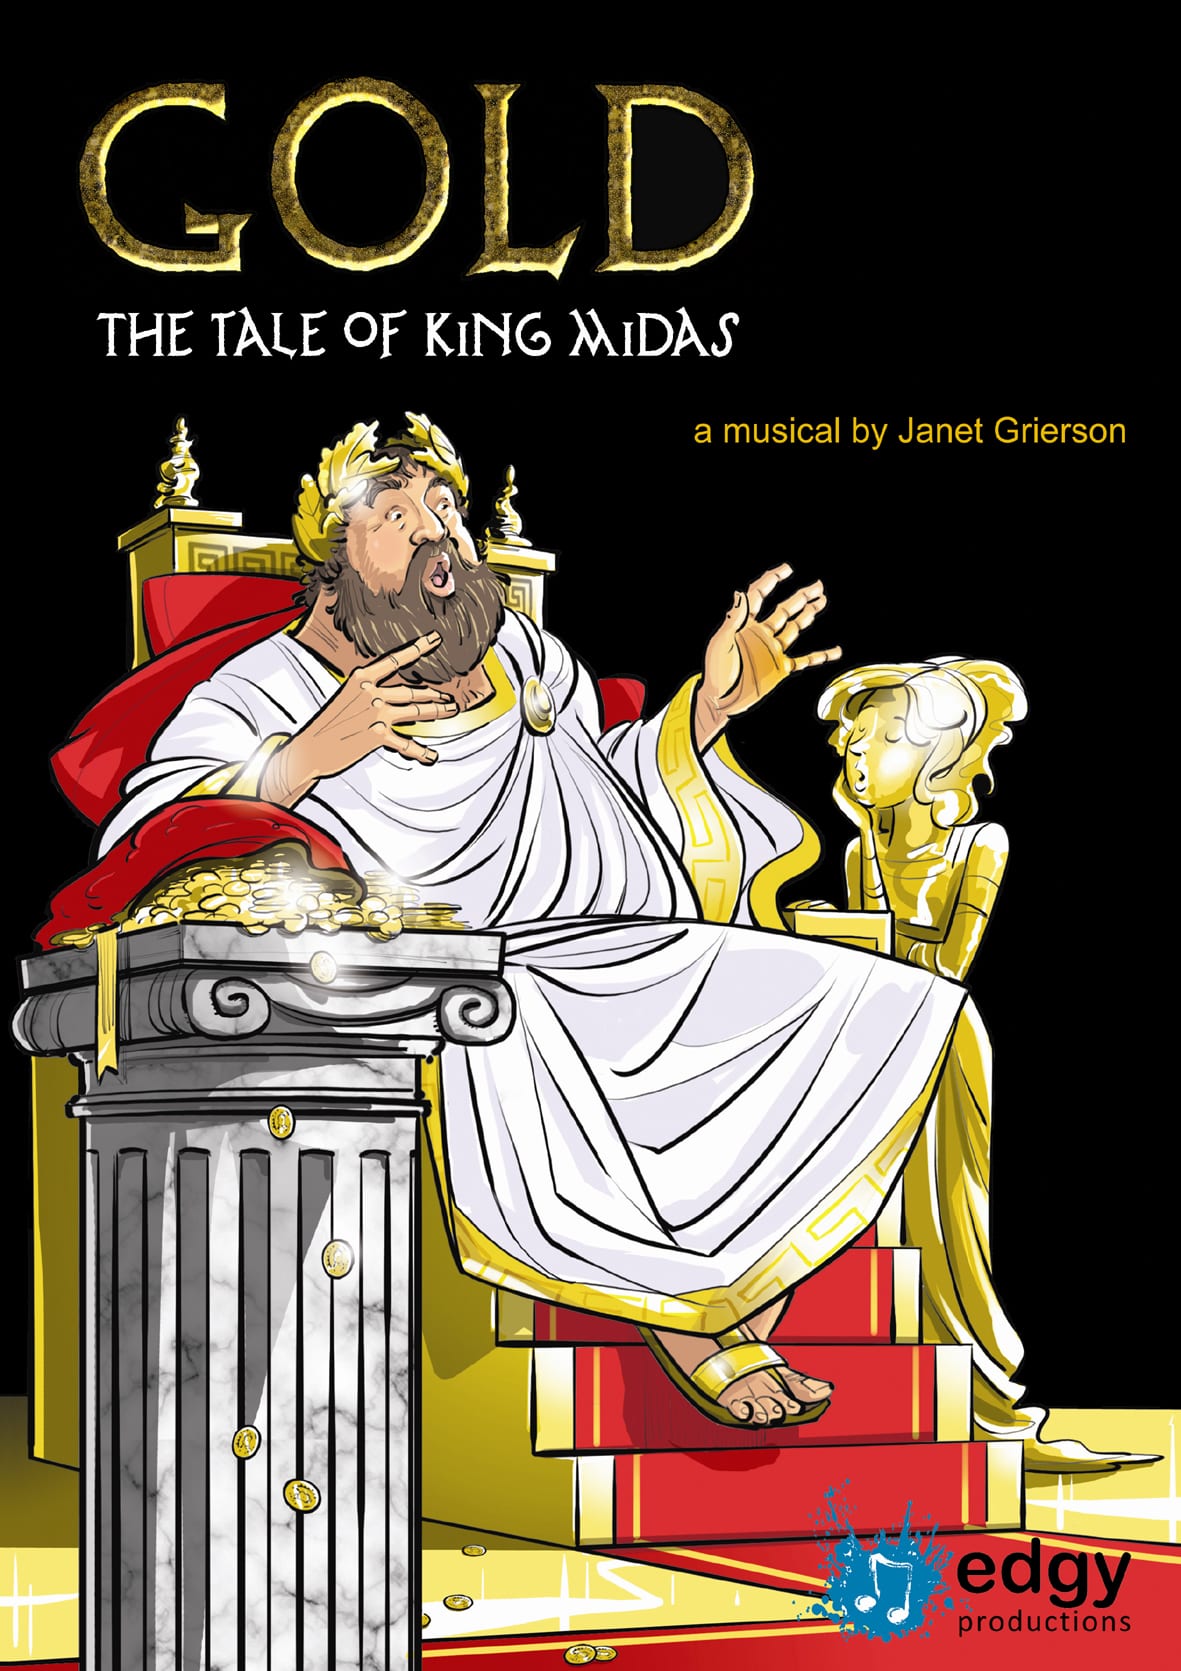 BIG BOOK ON THE TITLE : THE KING MIDAS & THE GOLDEN TOUCH